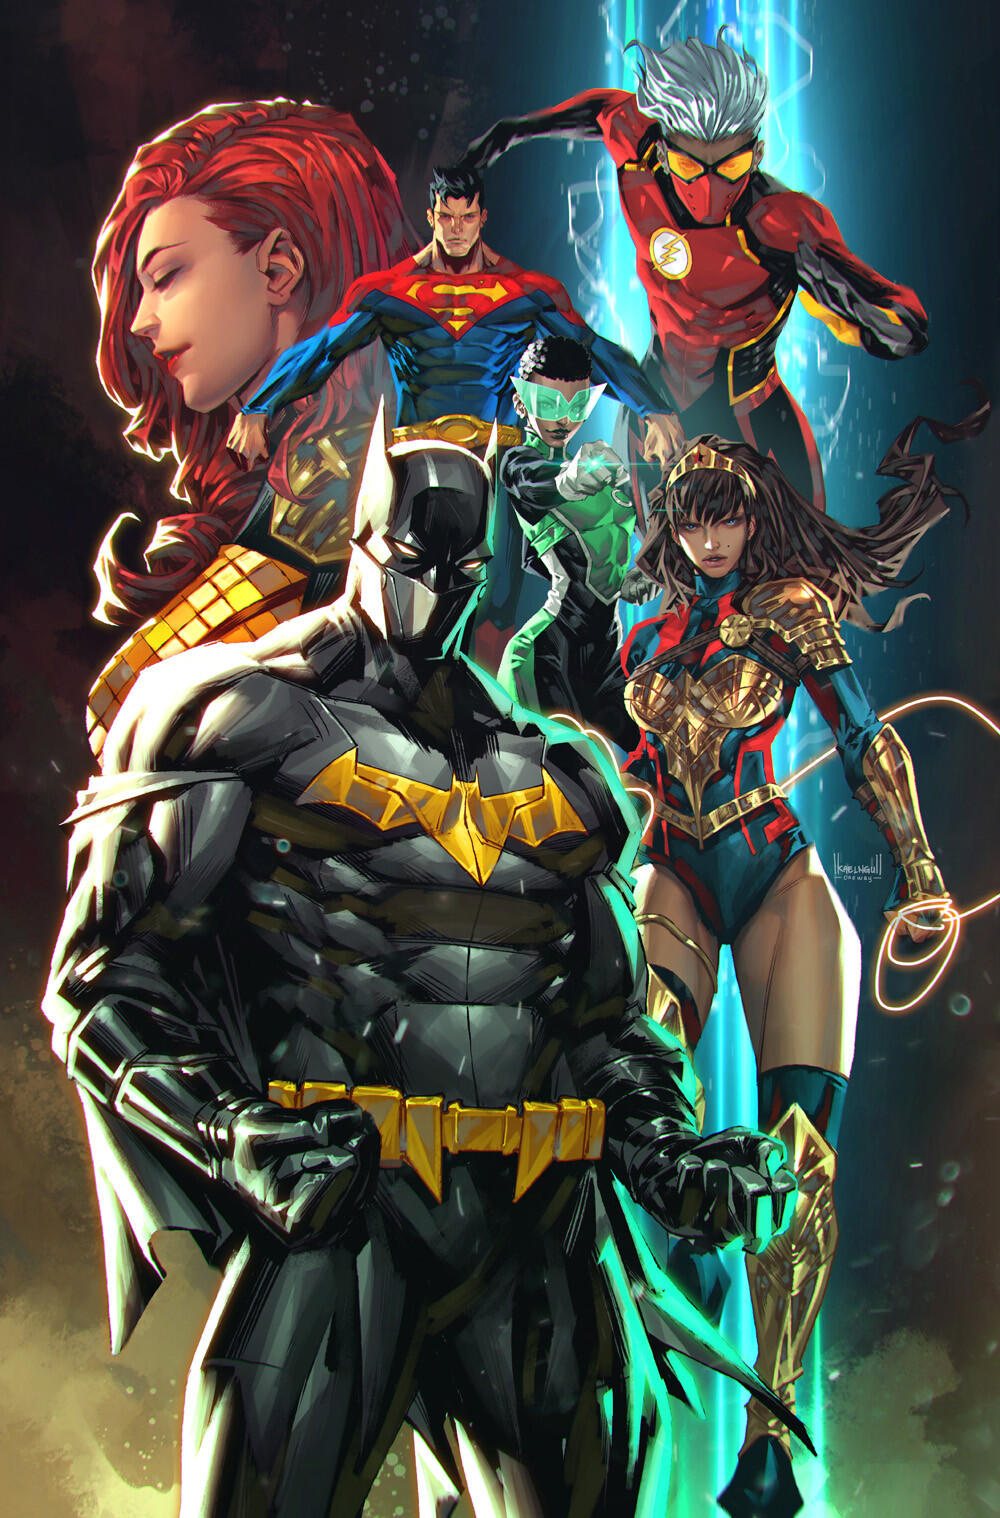 Future State : Justice League #1 
RELEASED JAN 12TH, 2021